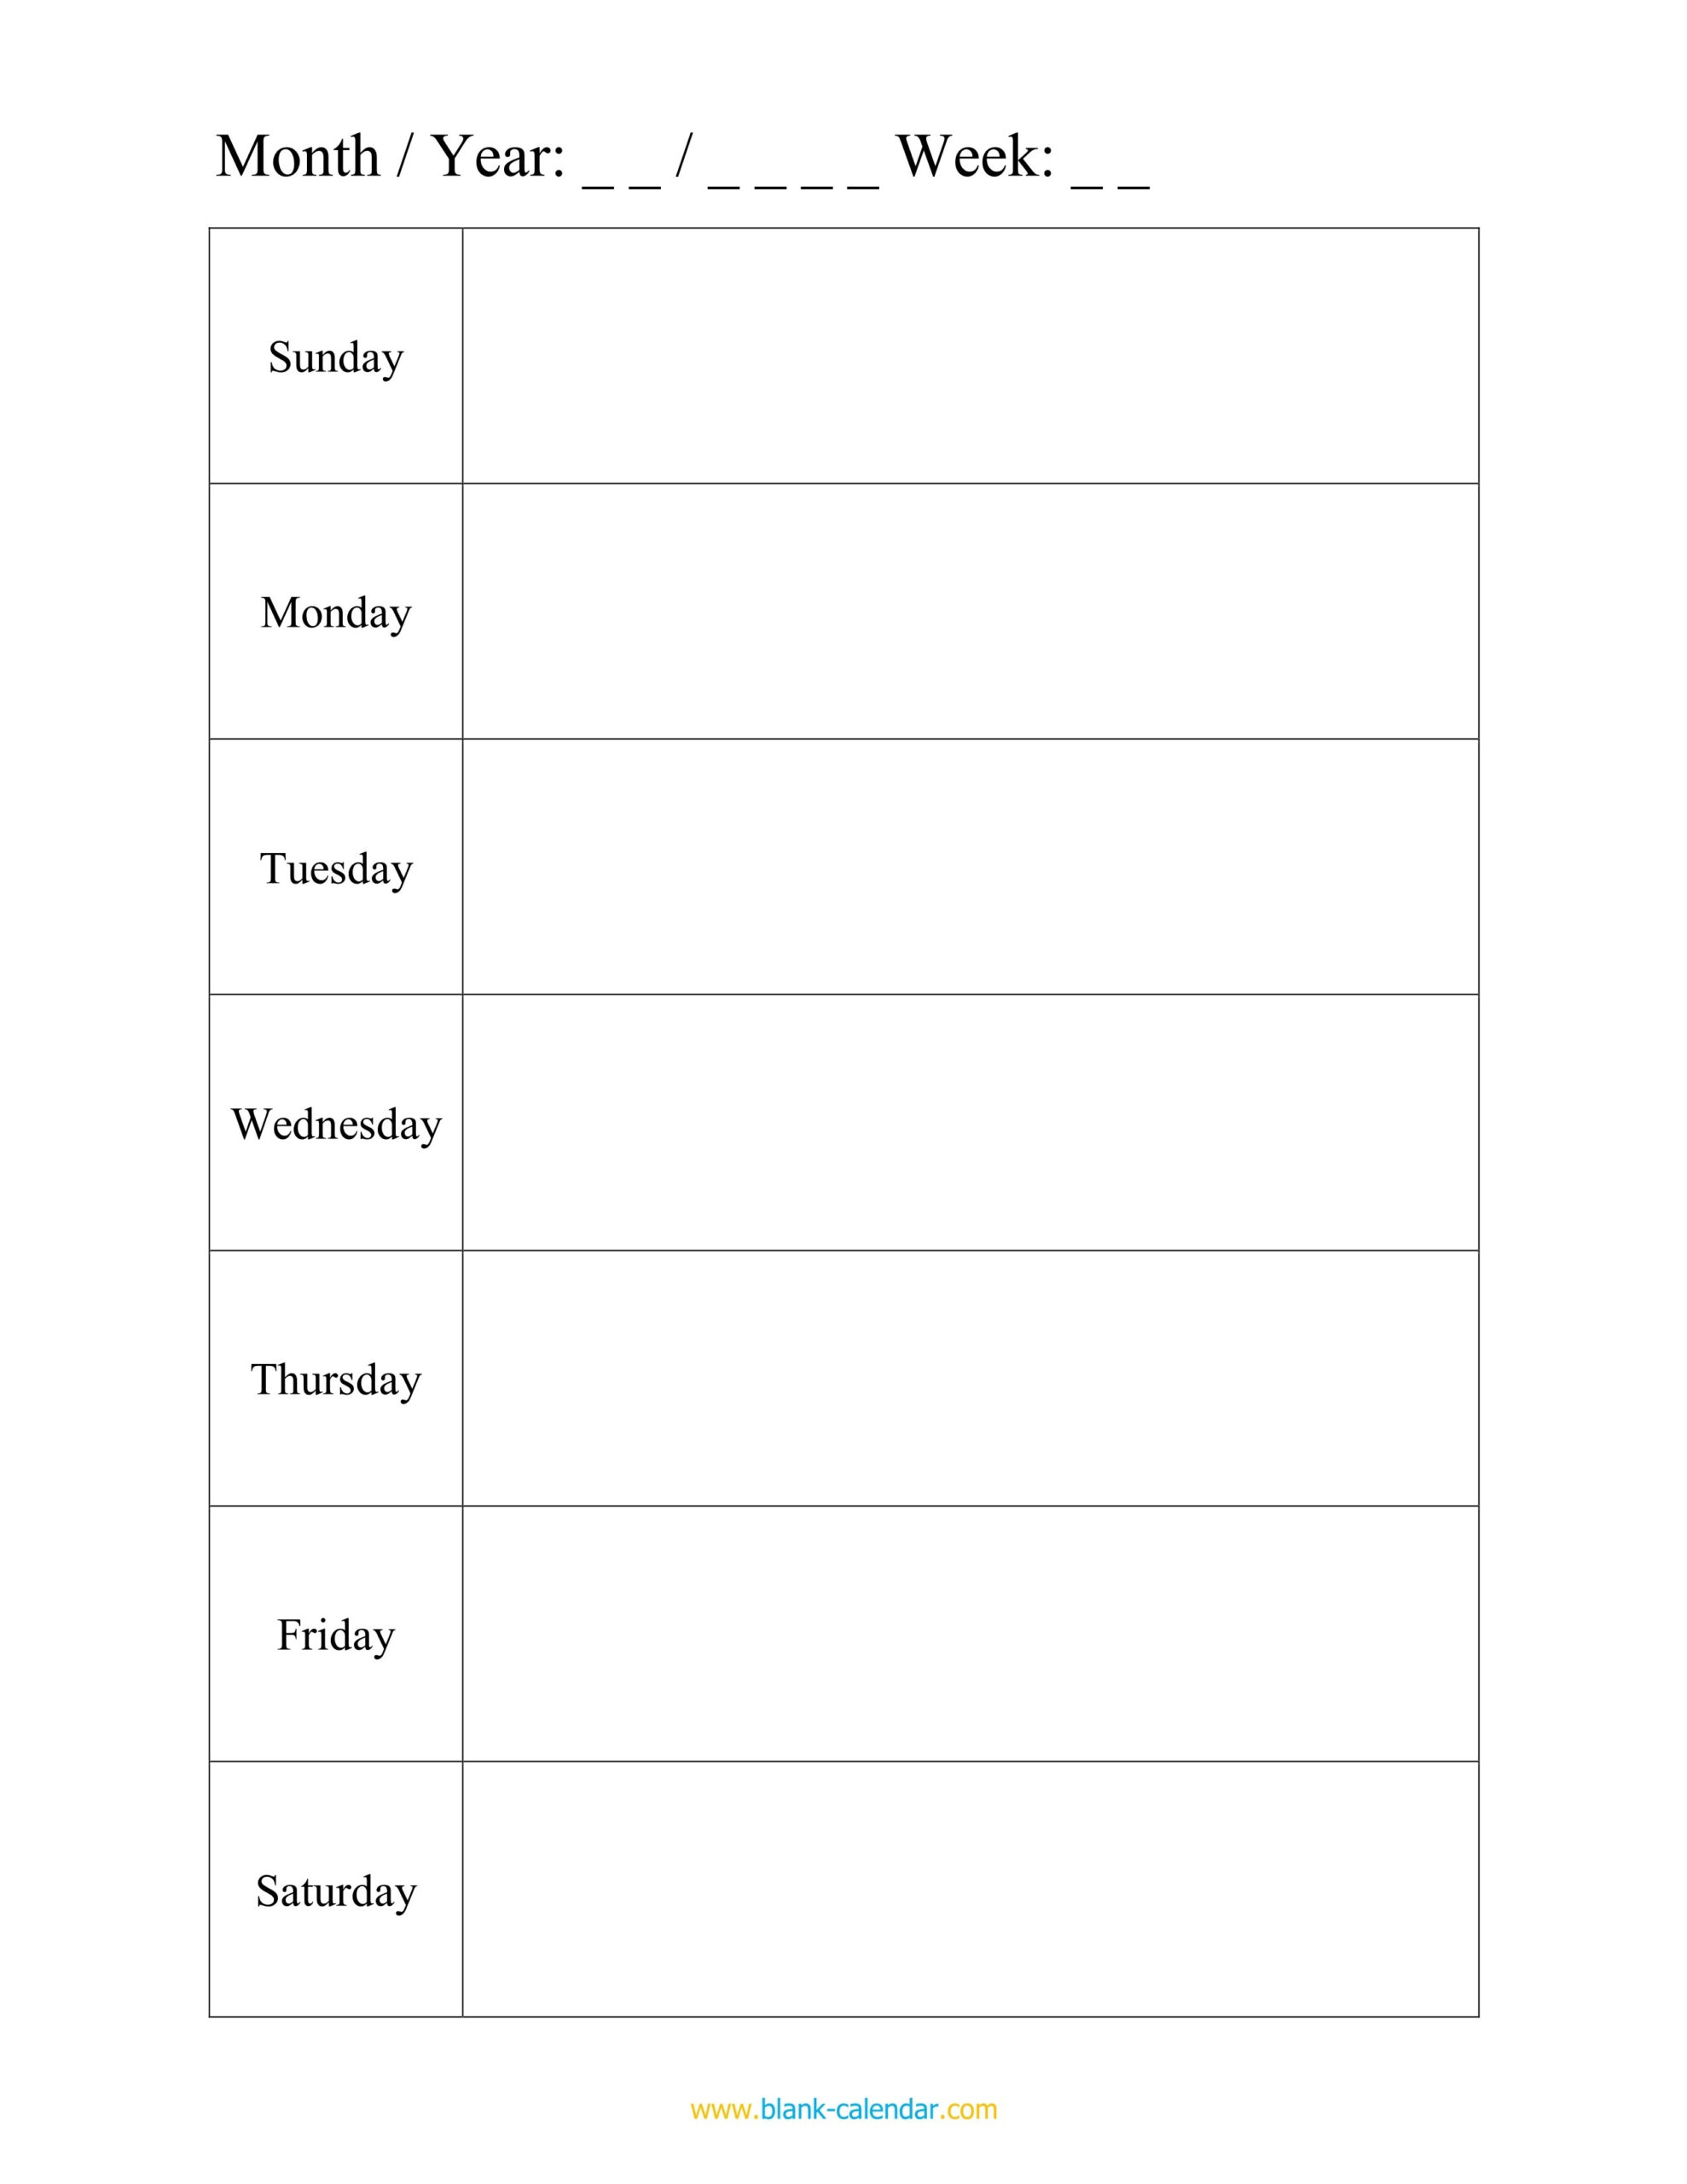 Monday Through Friday Planning Template | Calendar  Weekly Planner Printable Monday Through Friday